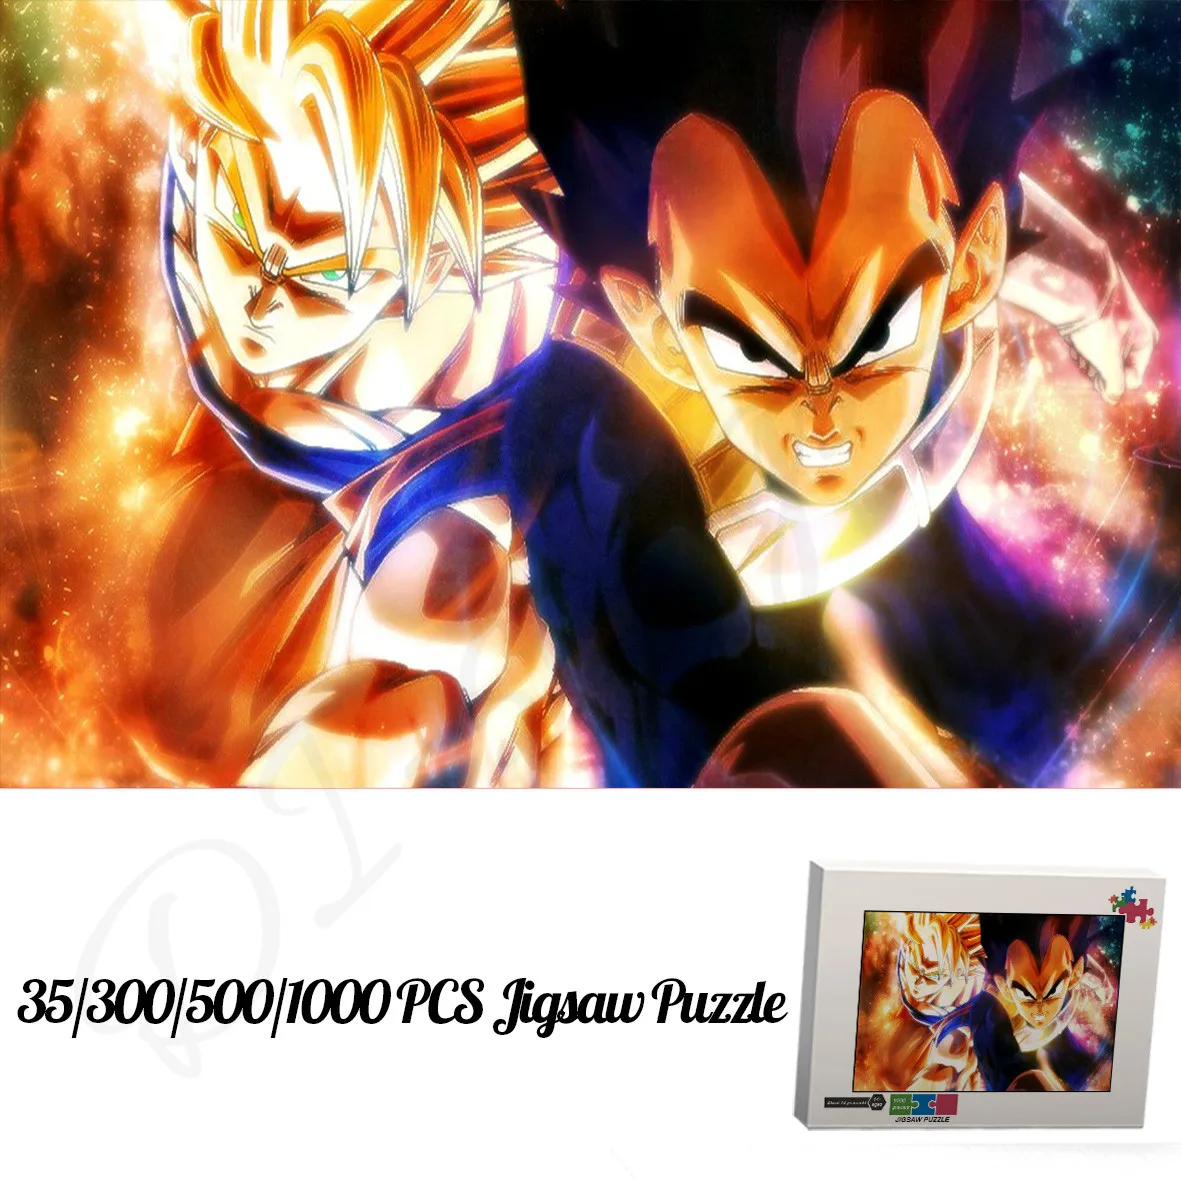 Goku and Gohan Puzzles for Kids Dragon Ball Classic Japanese Anime 35 300 500 1000 Pieces Wooden Jigsaw Puzzles Unique Gifts